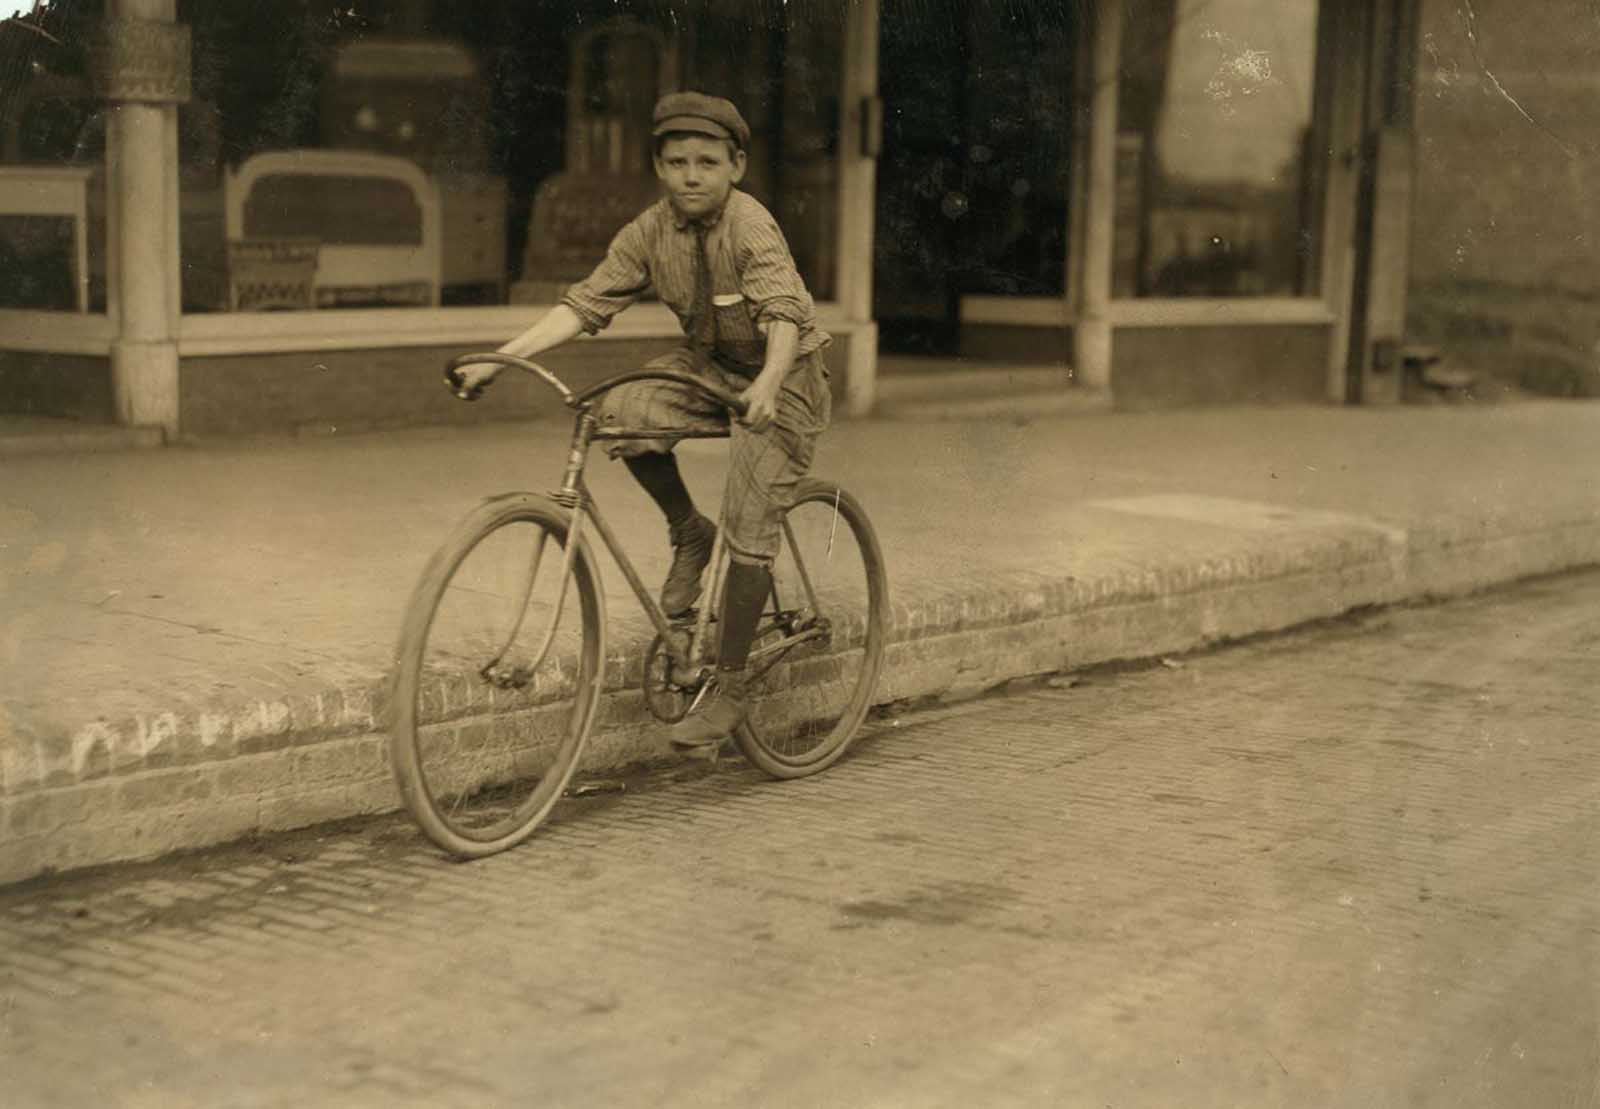 Percy Neville, eleven year old messenger boy. Messenger boy #6 for Mackay Telegraph Company.